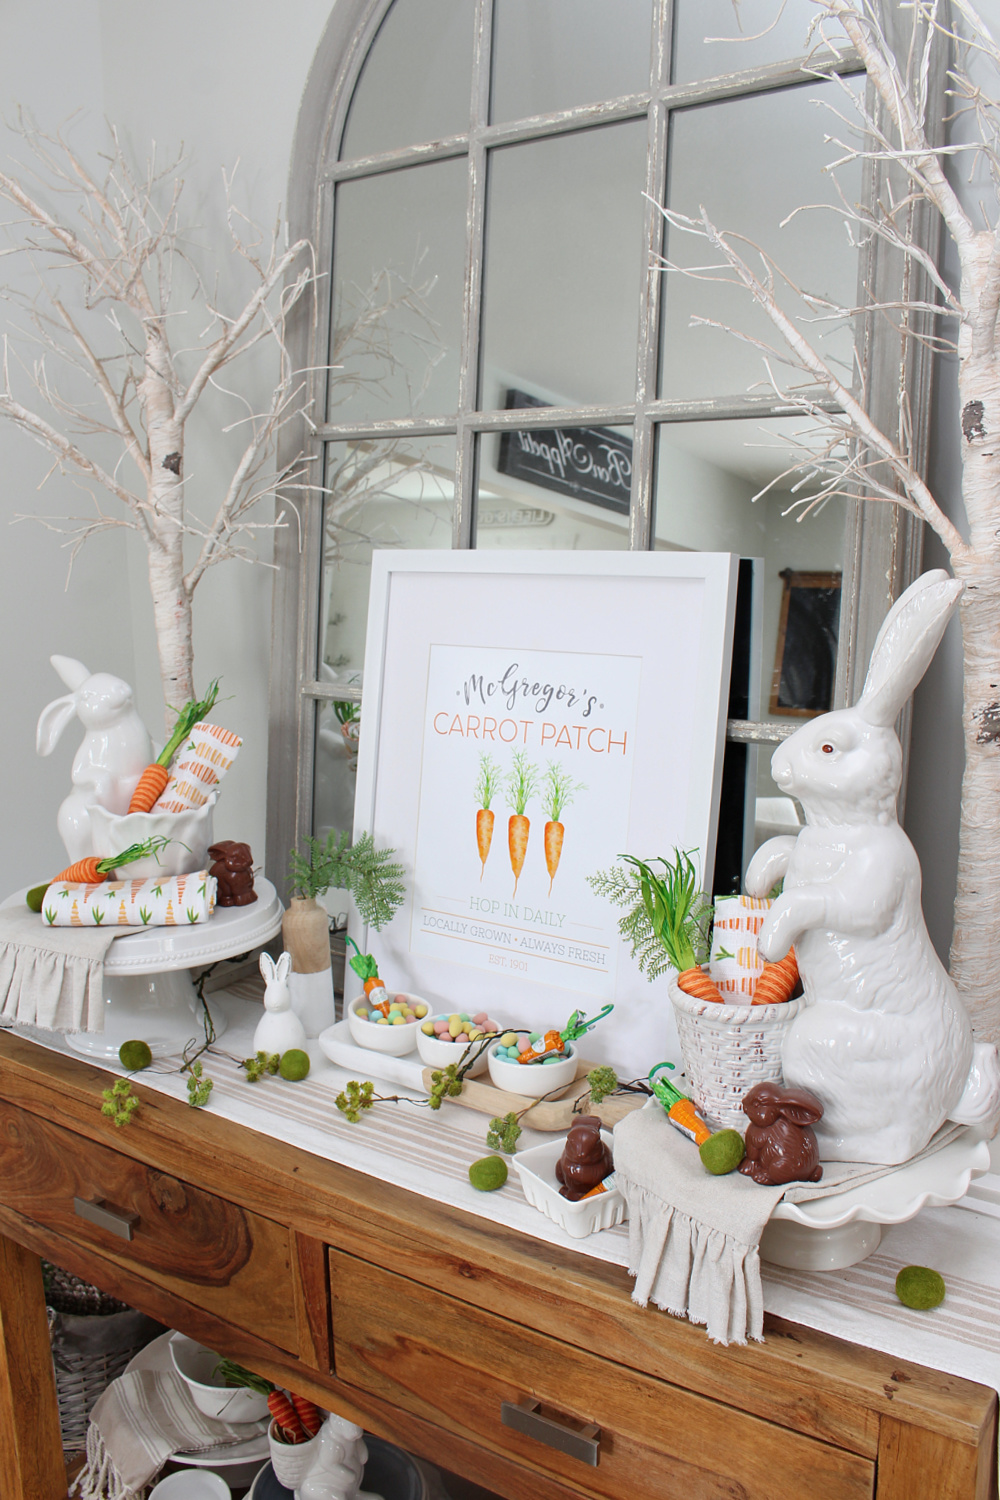 Dining room sideboard decorated for spring with white bunnies and carrots.